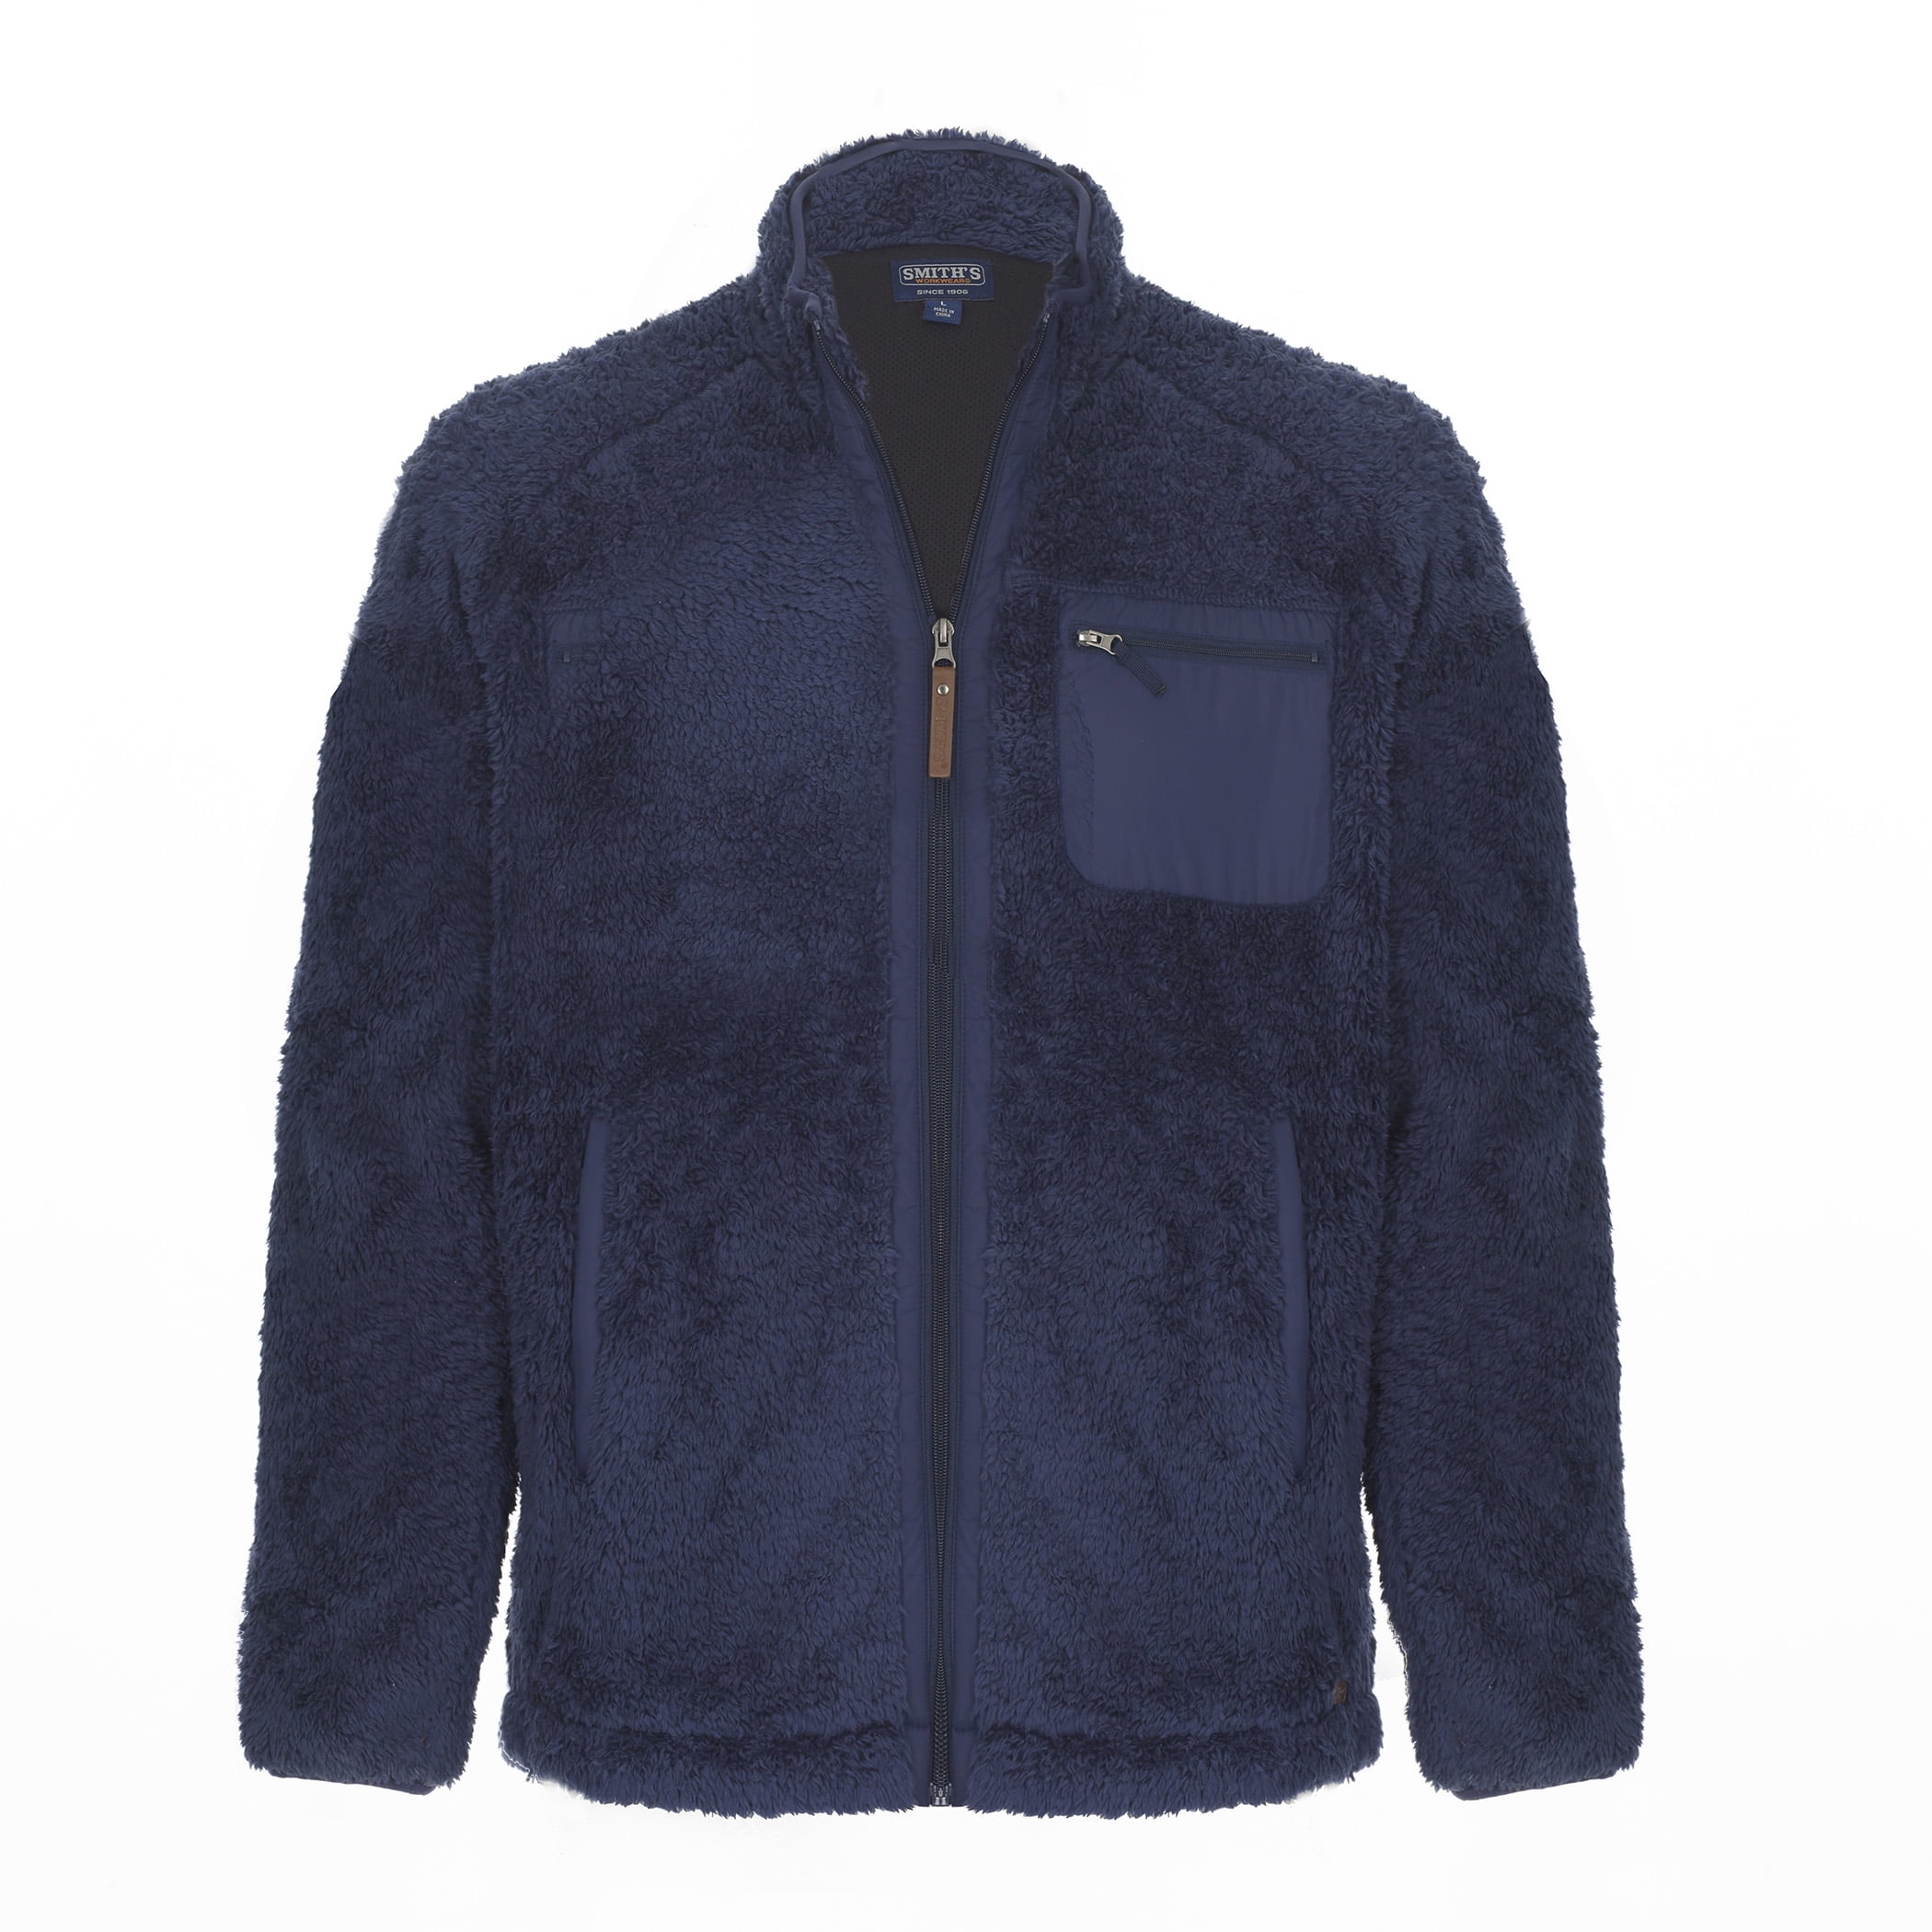 Smith's Workwear Butter-Sherpa Zip Jacket with Mesh Lining - Walmart.com